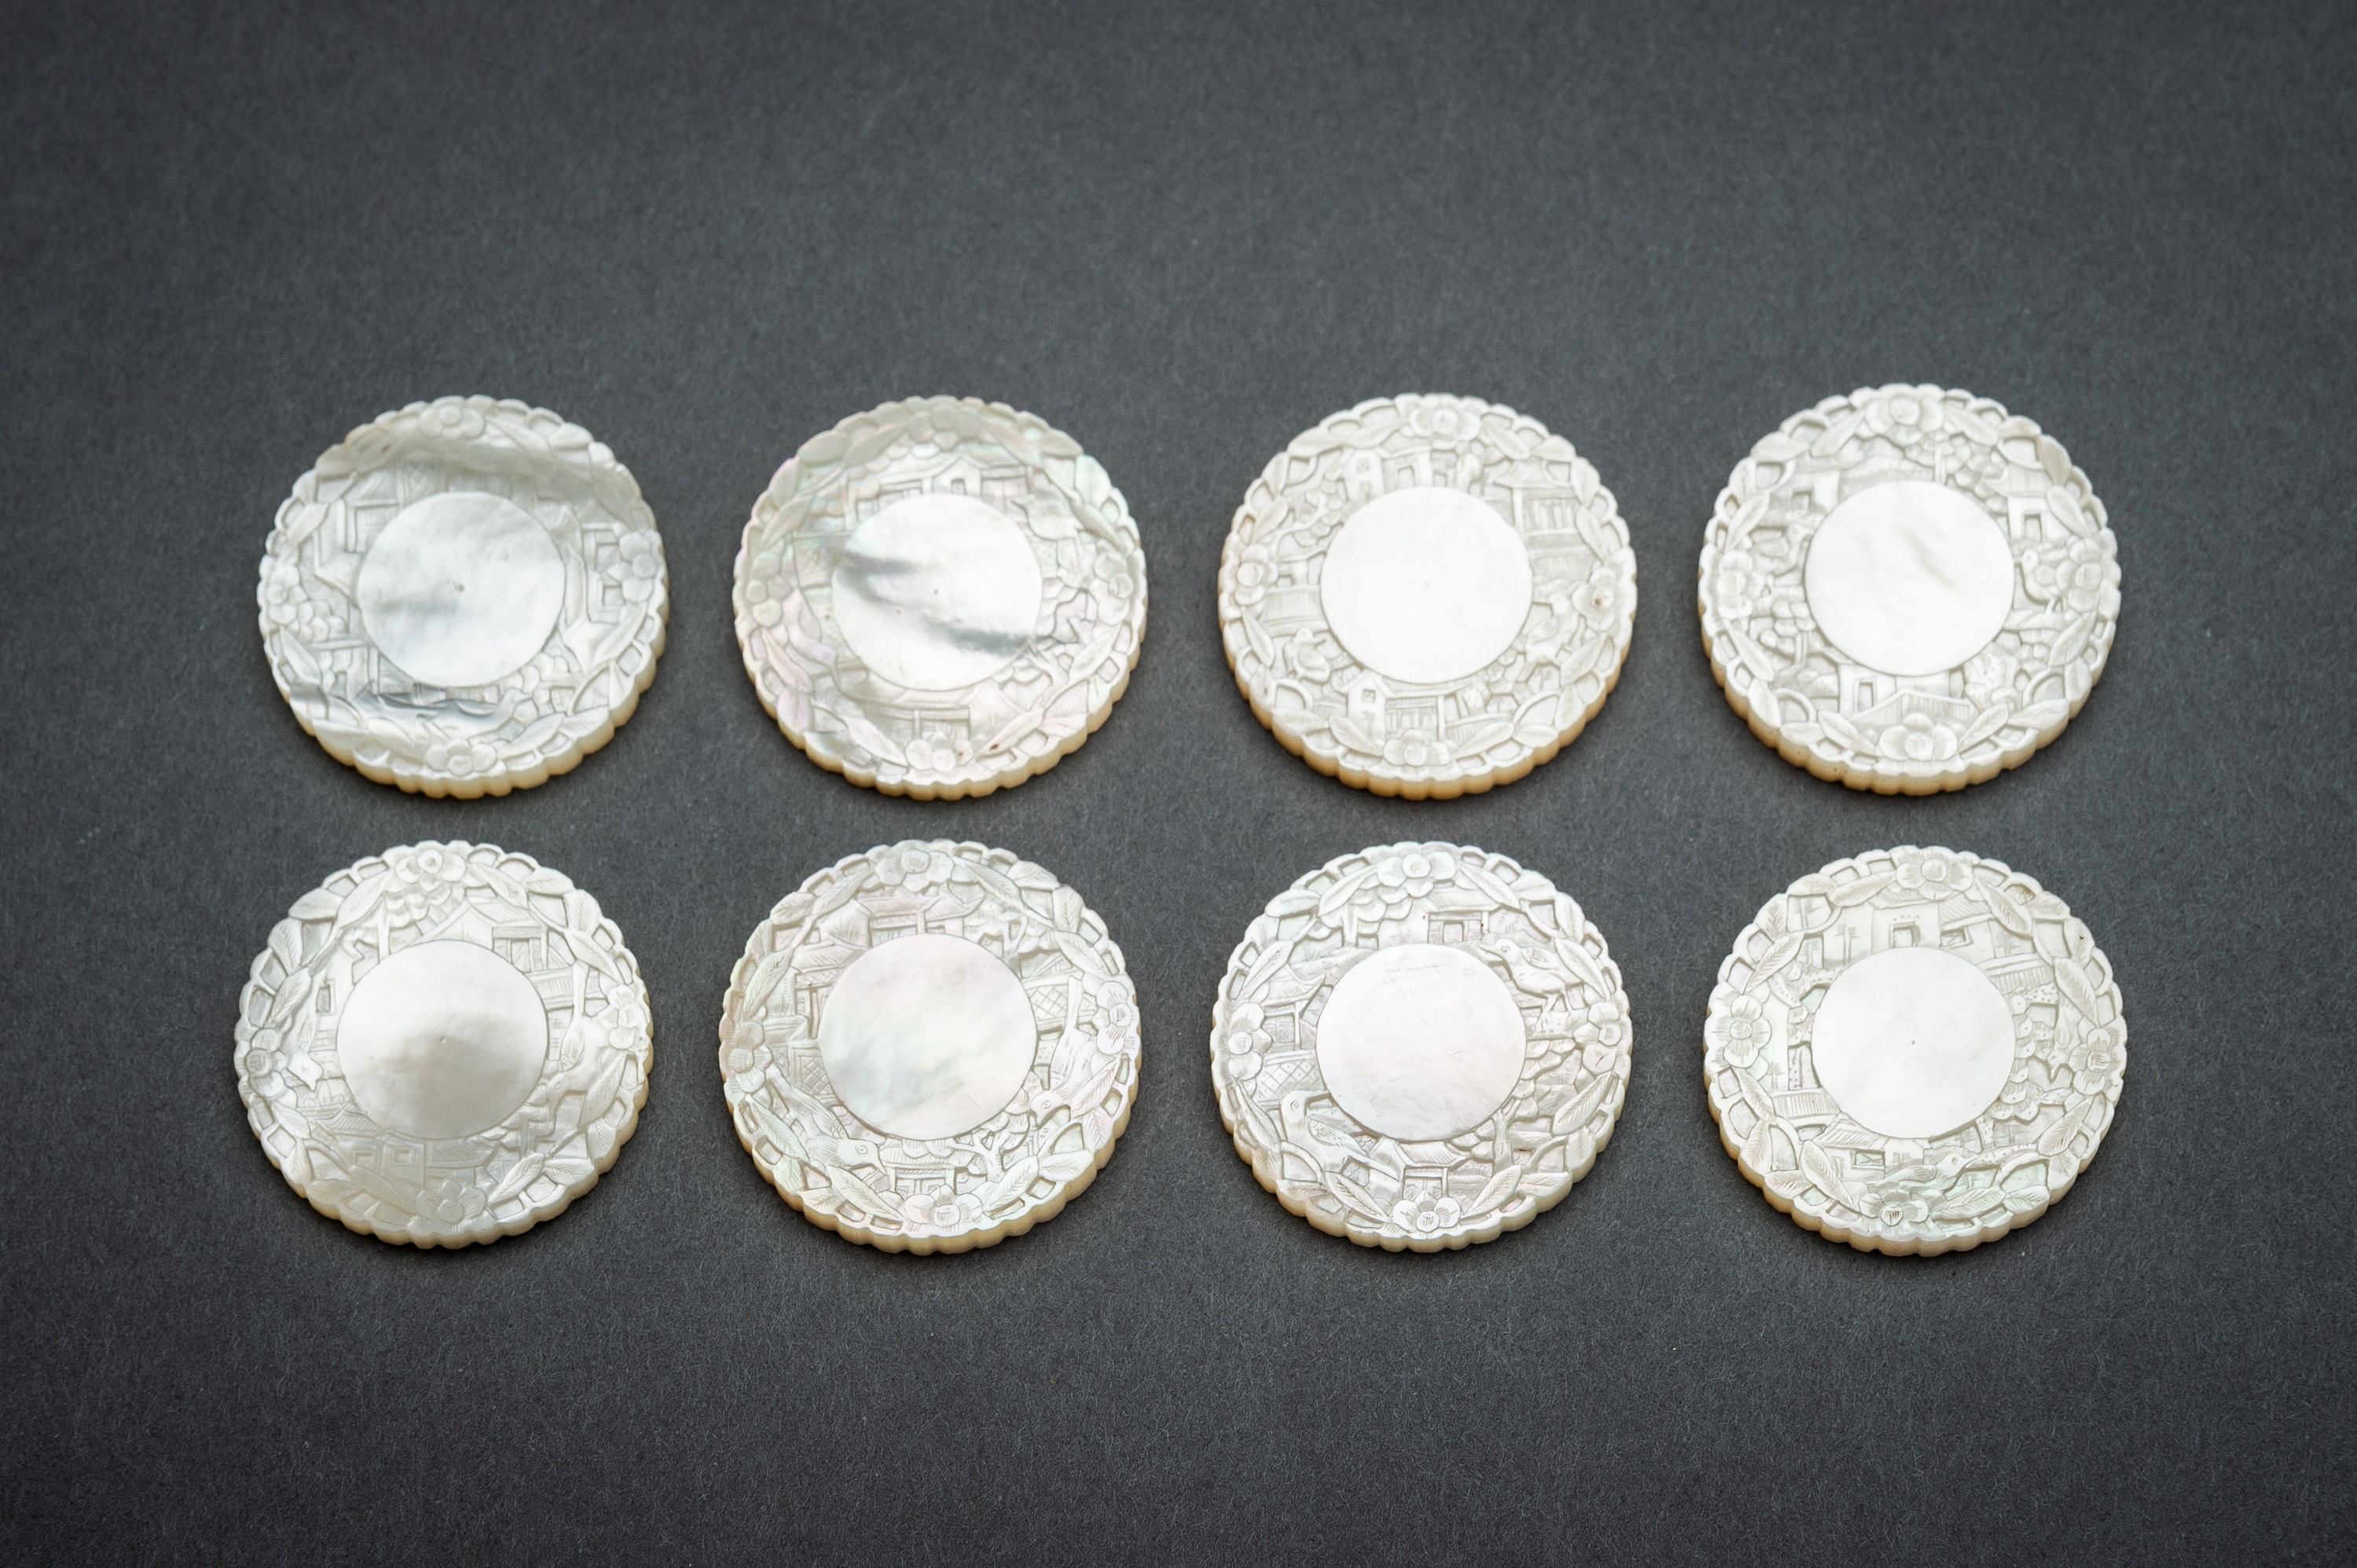 A SET OF 14 MOTHER OF PEARL GAMING TOKENS - Image 6 of 9